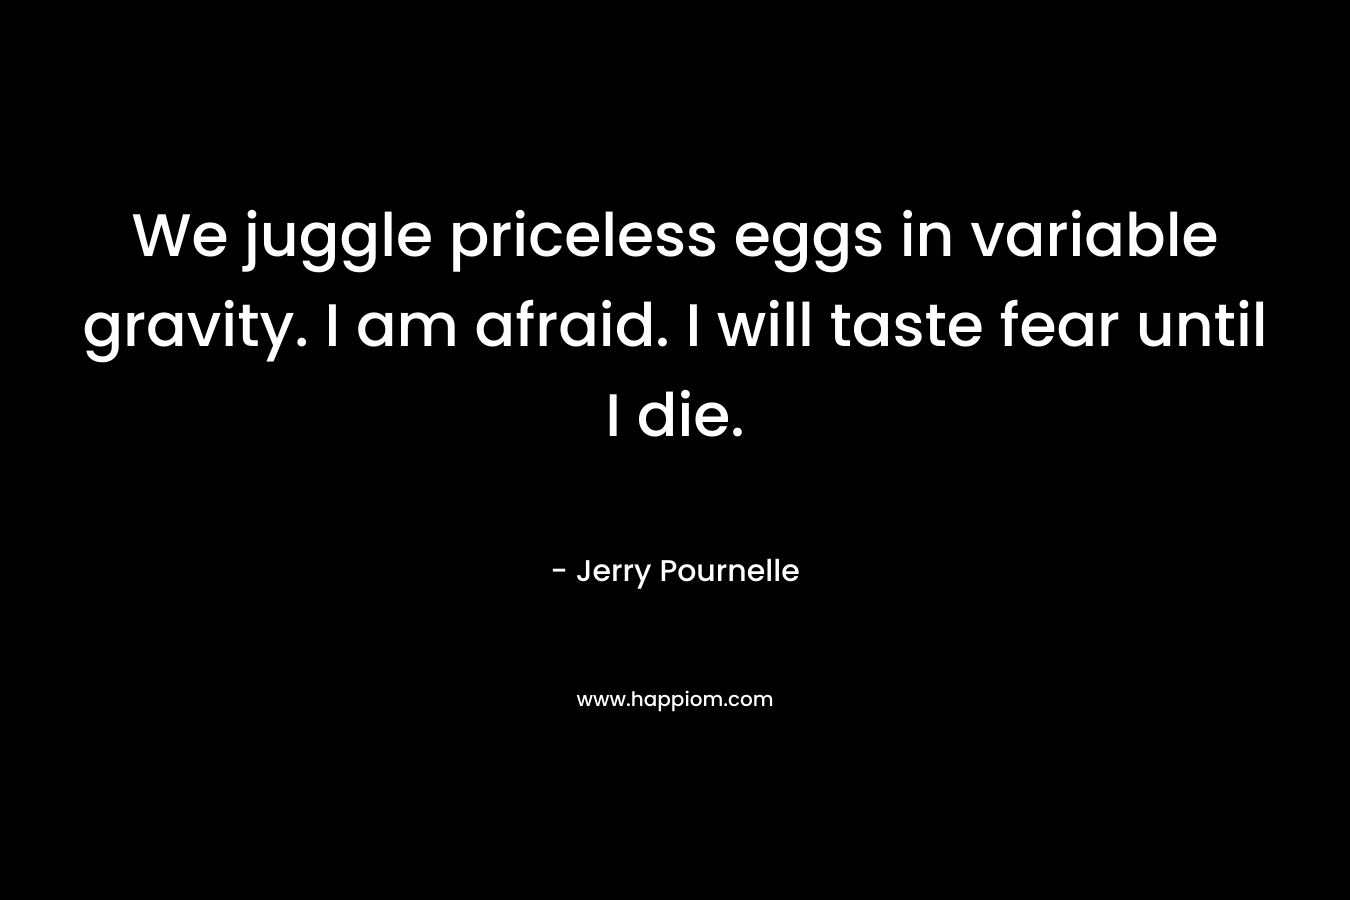 We juggle priceless eggs in variable gravity. I am afraid. I will taste fear until I die. – Jerry Pournelle